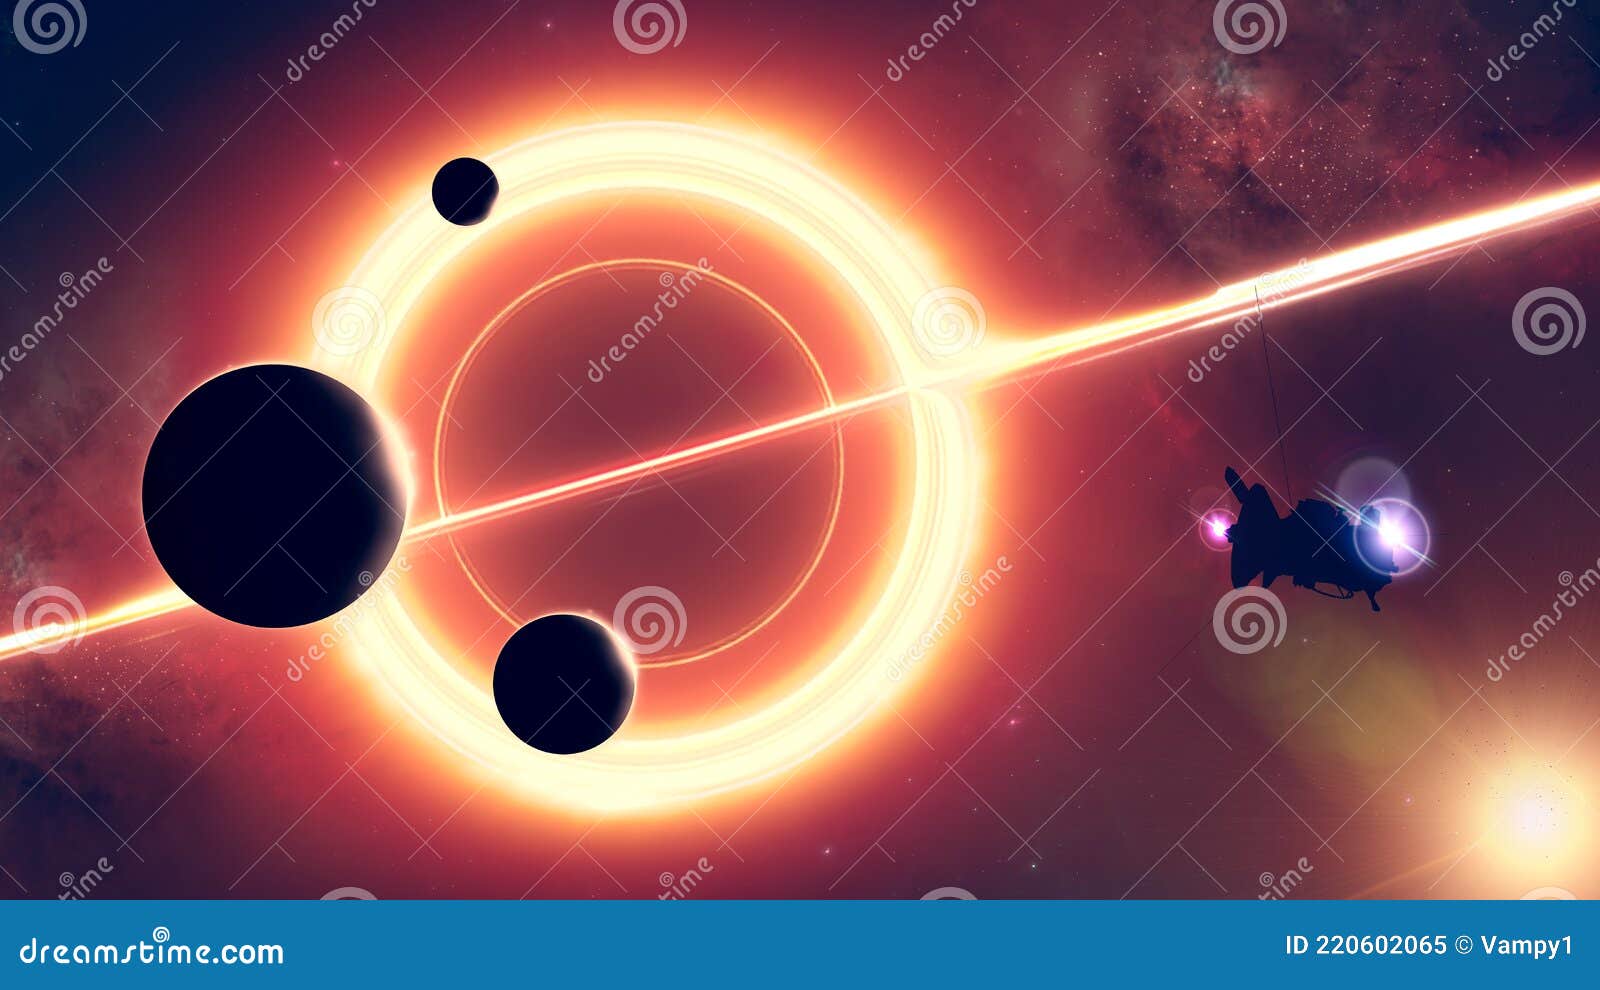 planets and exoplanets of unexplored galaxiesand a black hole. sci-fi. new worlds to discover. probe